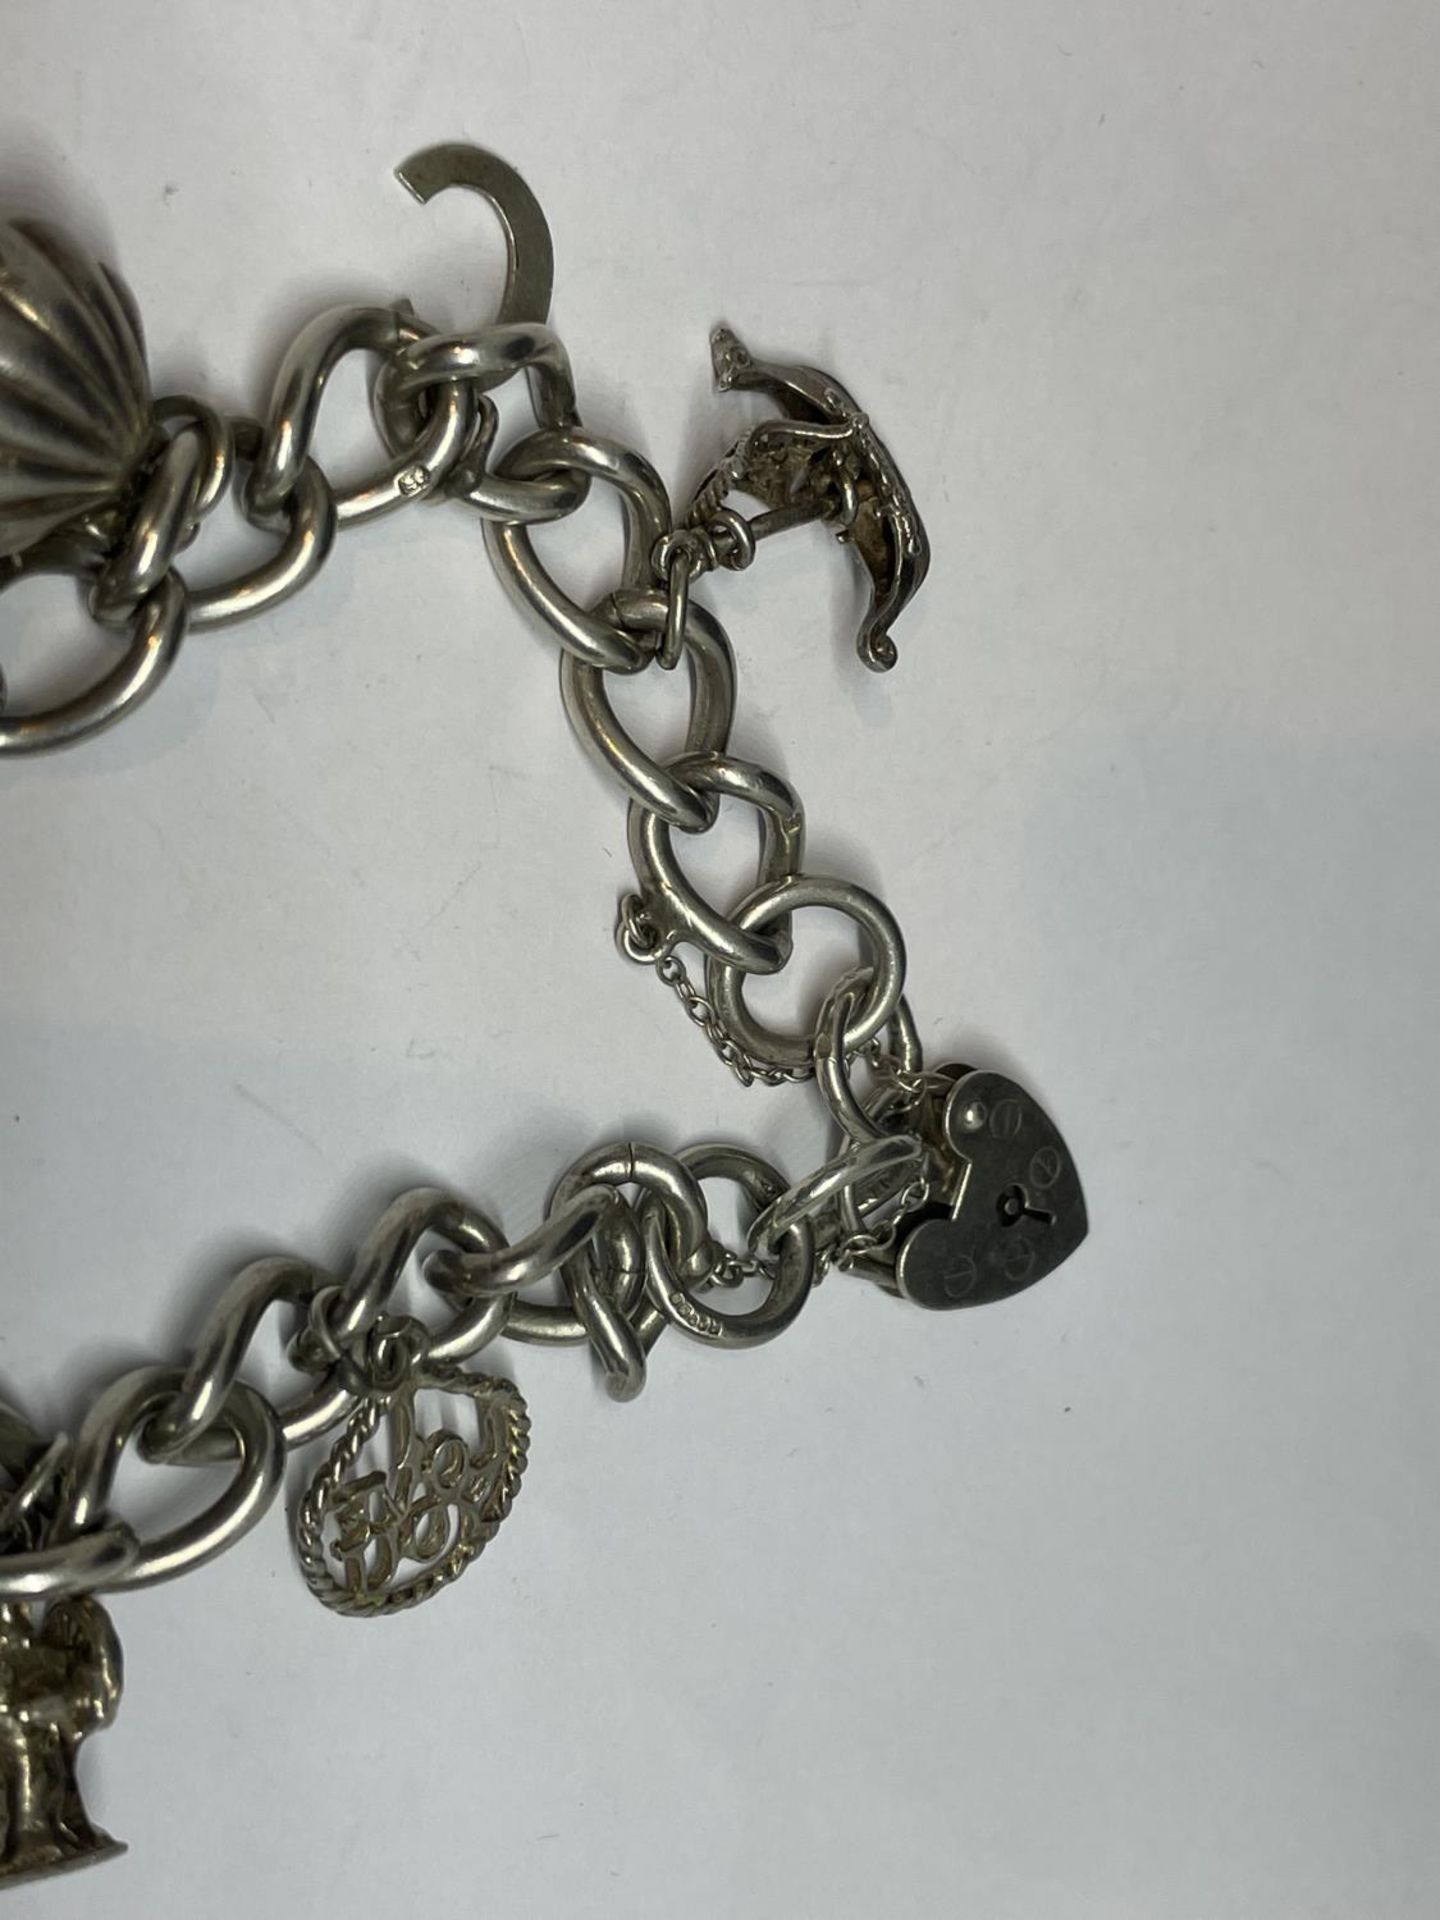 A SILVER CHARM BRACELET WITH EIGHT CHARMS - Image 3 of 4